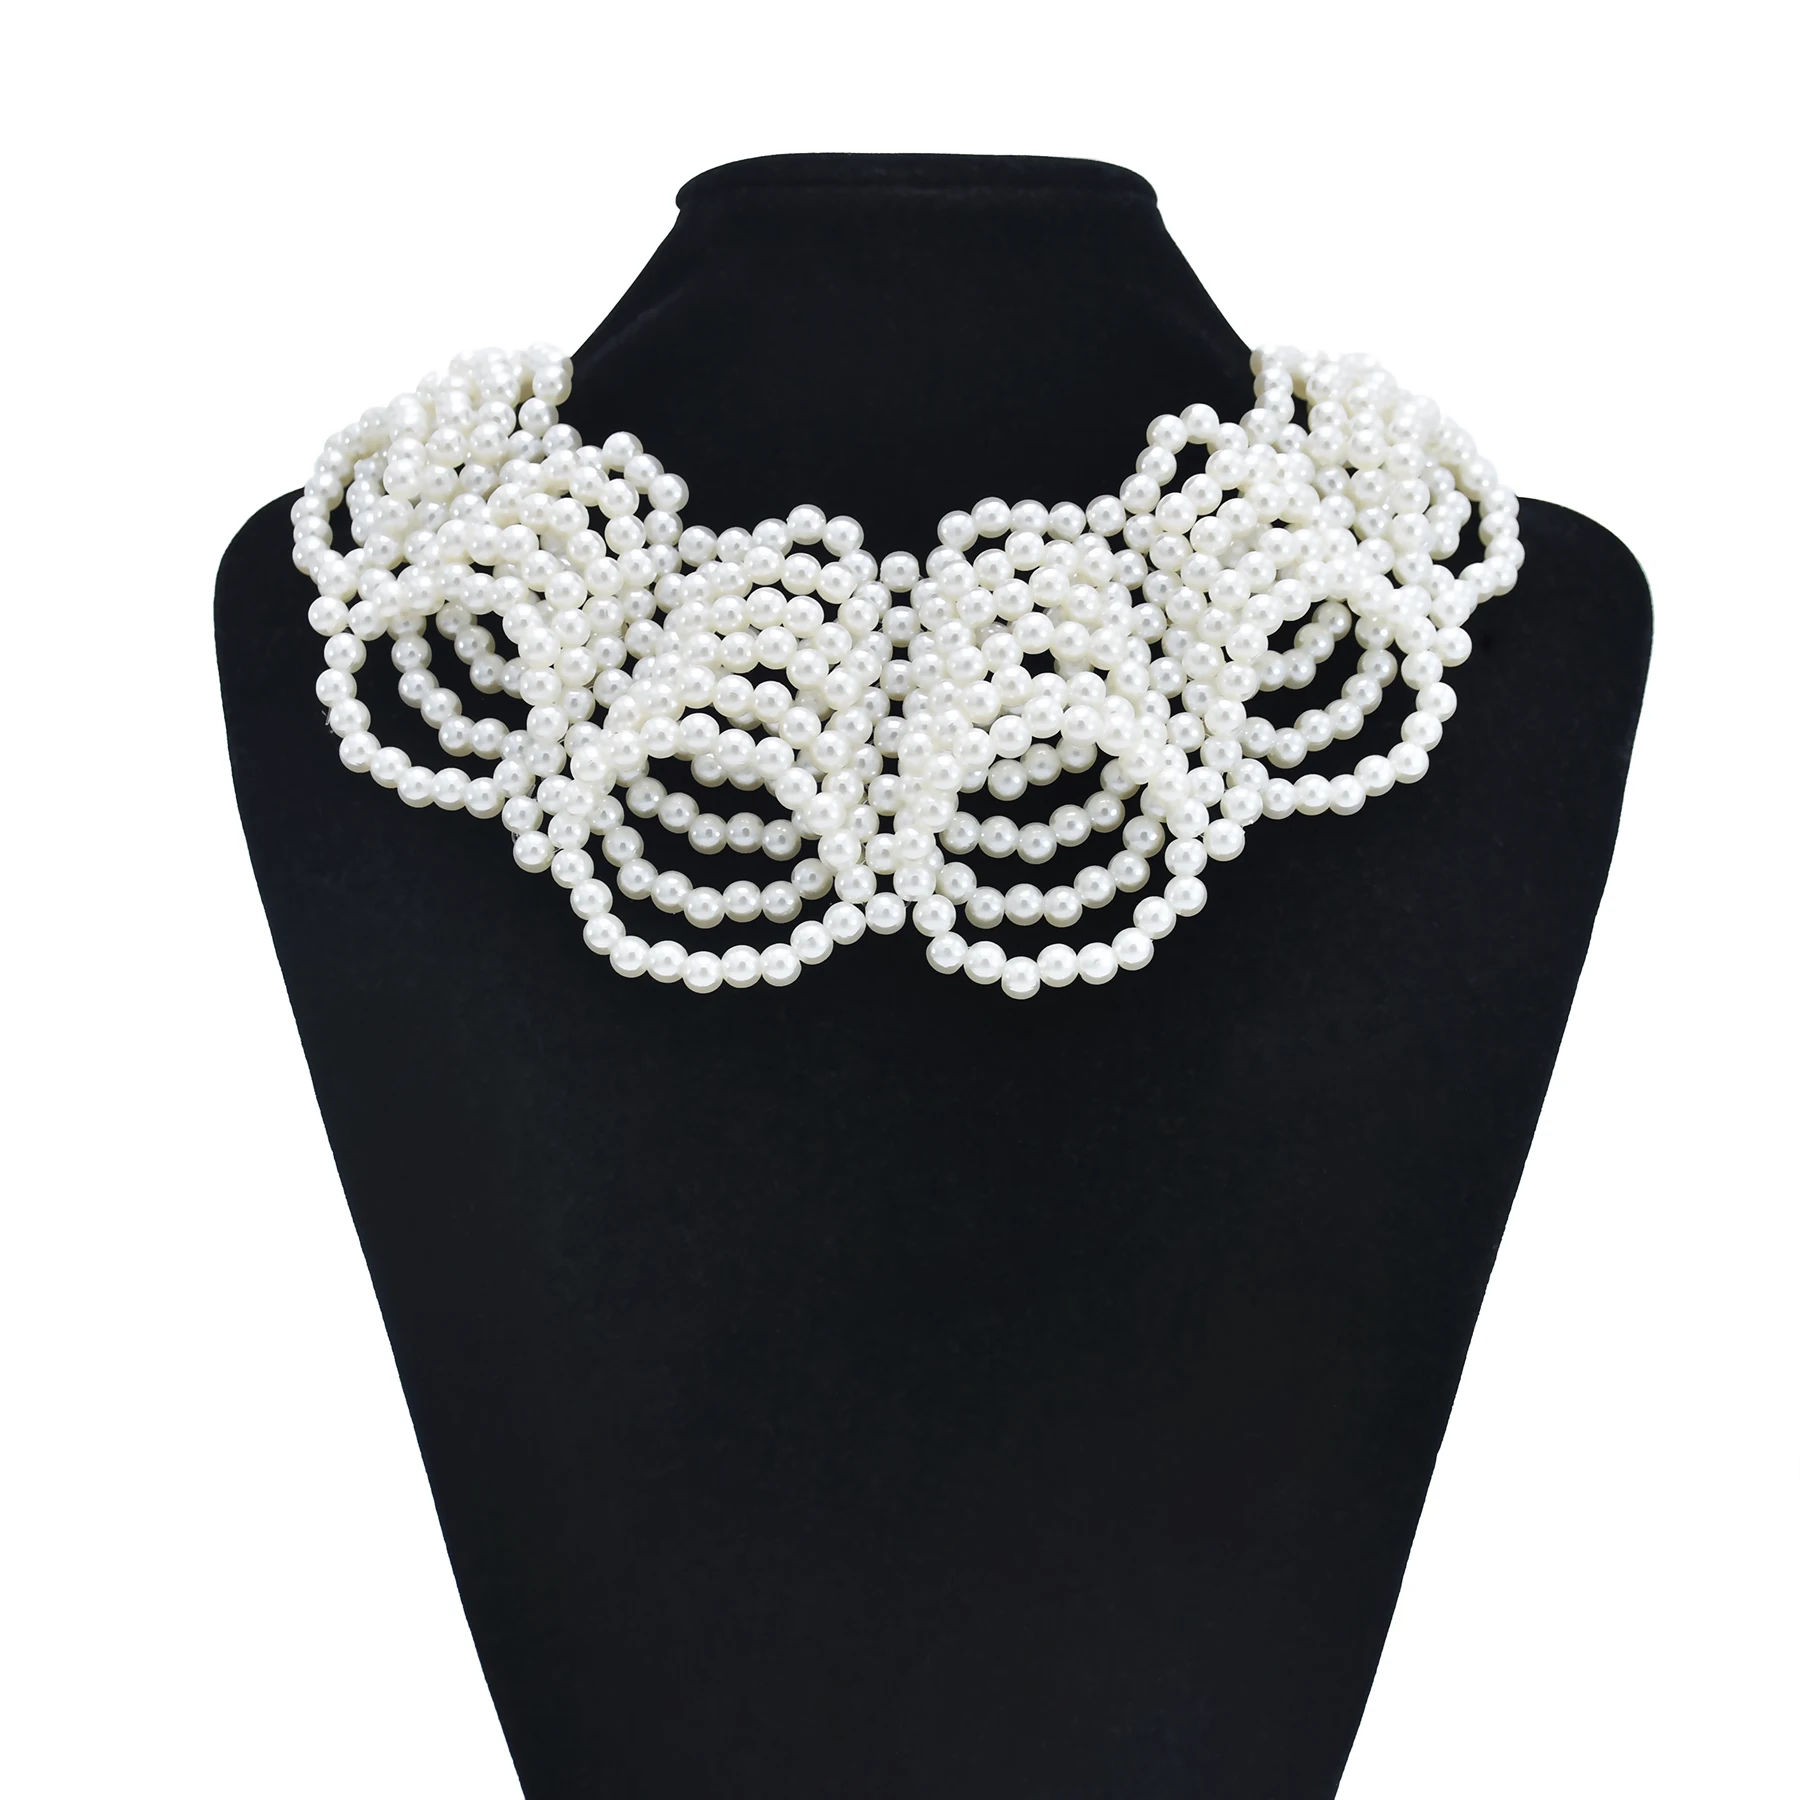 

Fashion Multilayer Pearl Necklace White ABS Pearl Women Jewelry Hand-Woven Beads Necklace Ethnic Style Jewelry